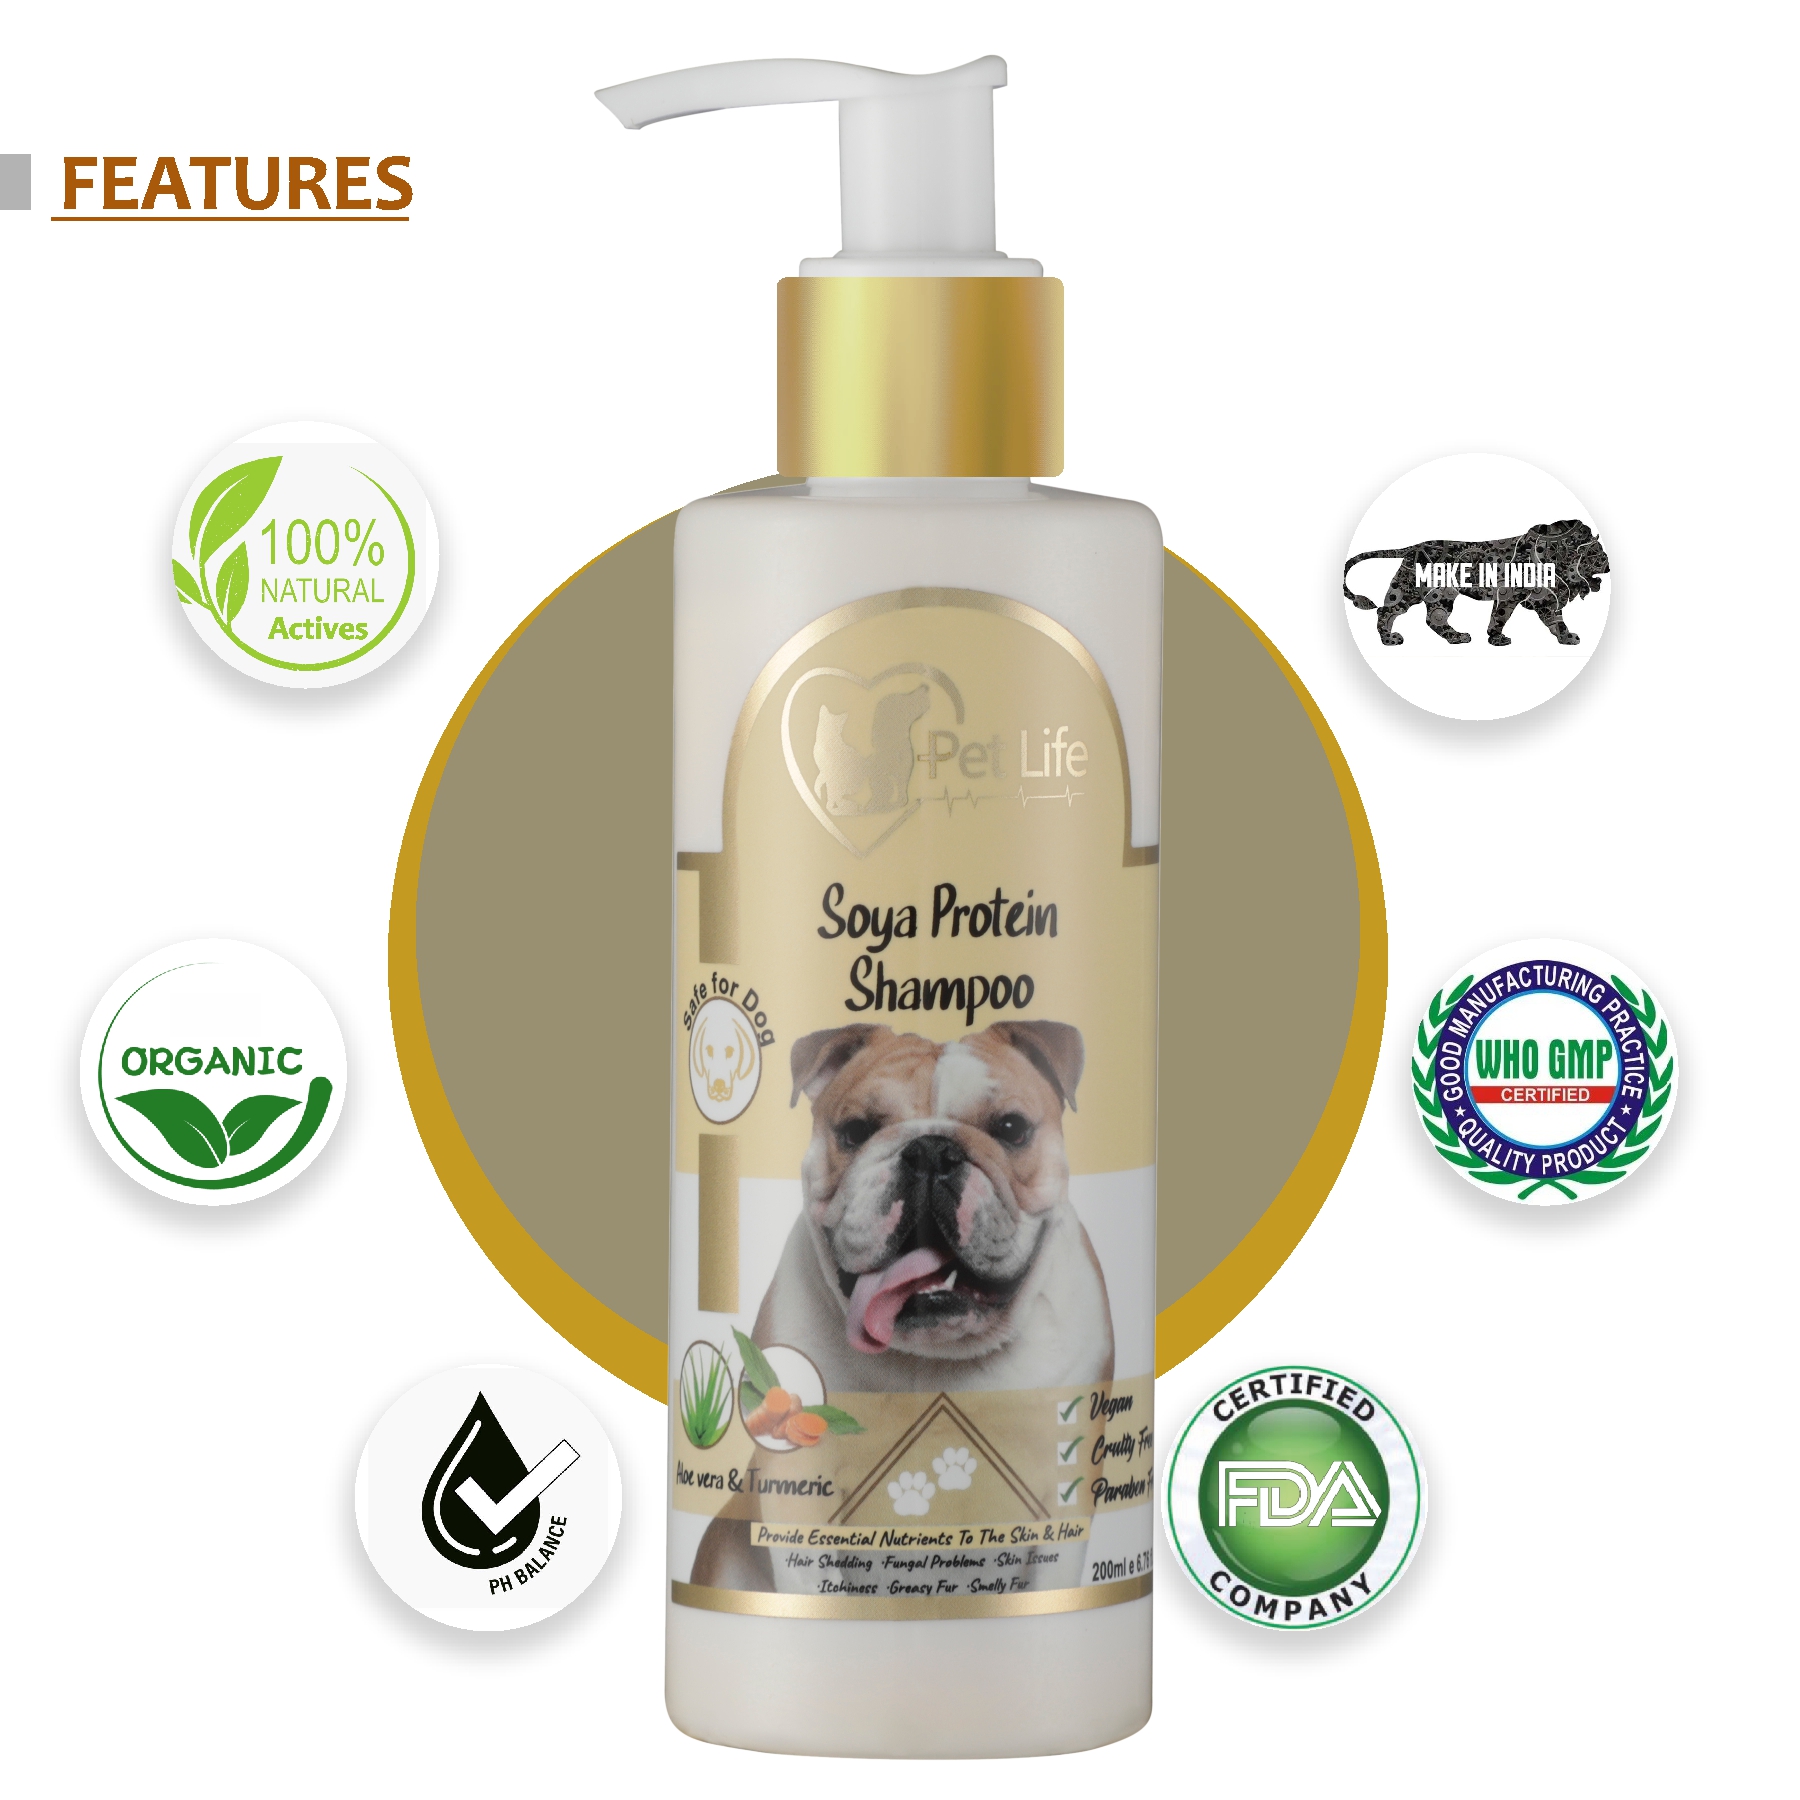 Pure Organic SOYA Protein Shampoo for Dog Effective to Greasy Hair/Smelly Fur/Hair Shedding/Silky & Shiny Hair/Protein Rich Dog Shampoo - Pet Friendly Formula for All Dog Breeds